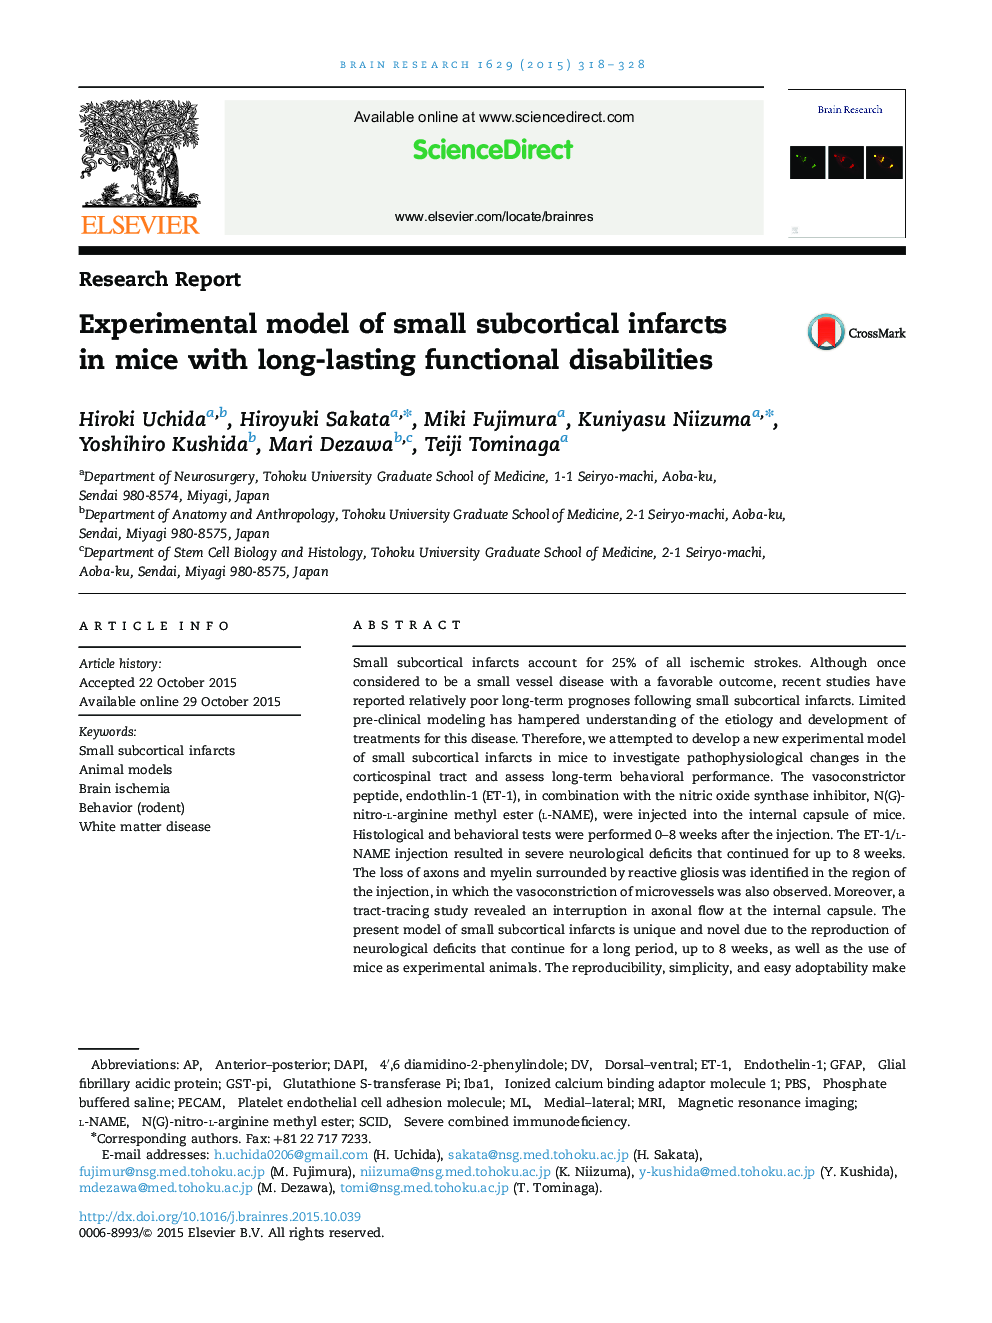 Research ReportExperimental model of small subcortical infarcts in mice with long-lasting functional disabilities